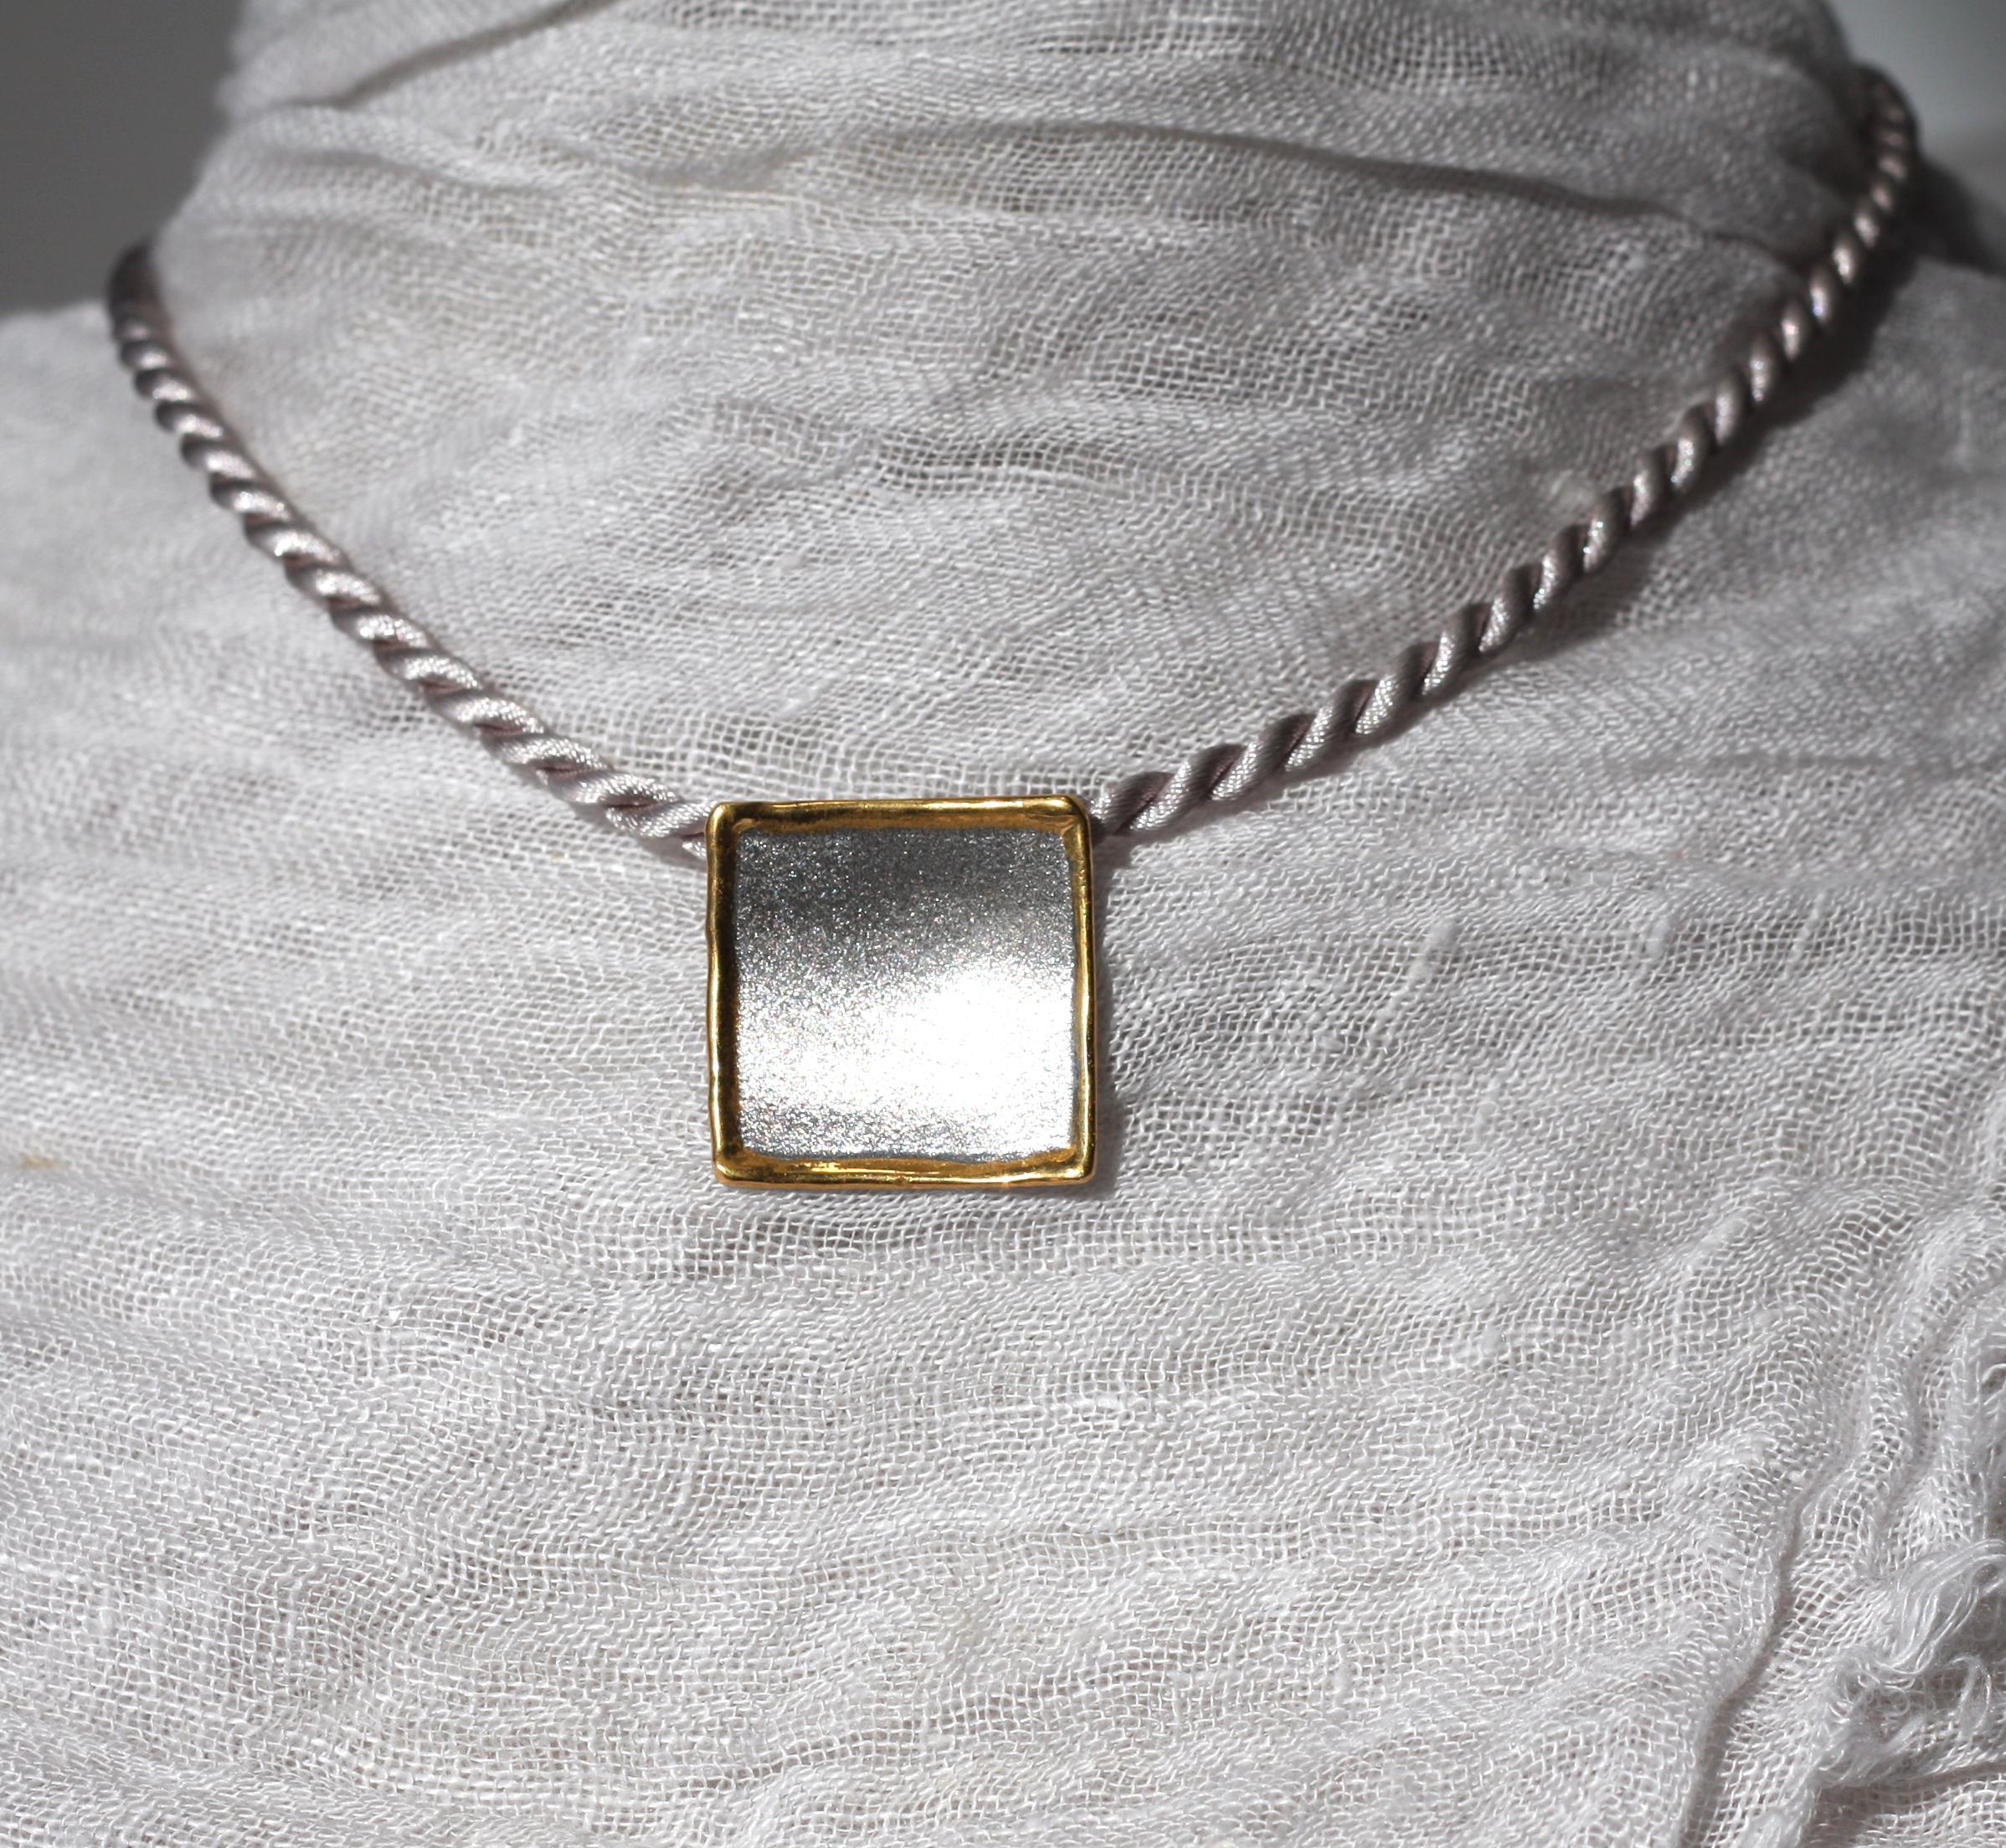 Yianni Creations geometrically shaped pendant enhancer from Midas Collection, which is all handcrafted from fine silver 950 purity and plated with palladium to resist the elements. This beautiful artisan pendant in its purity attracts by its texture